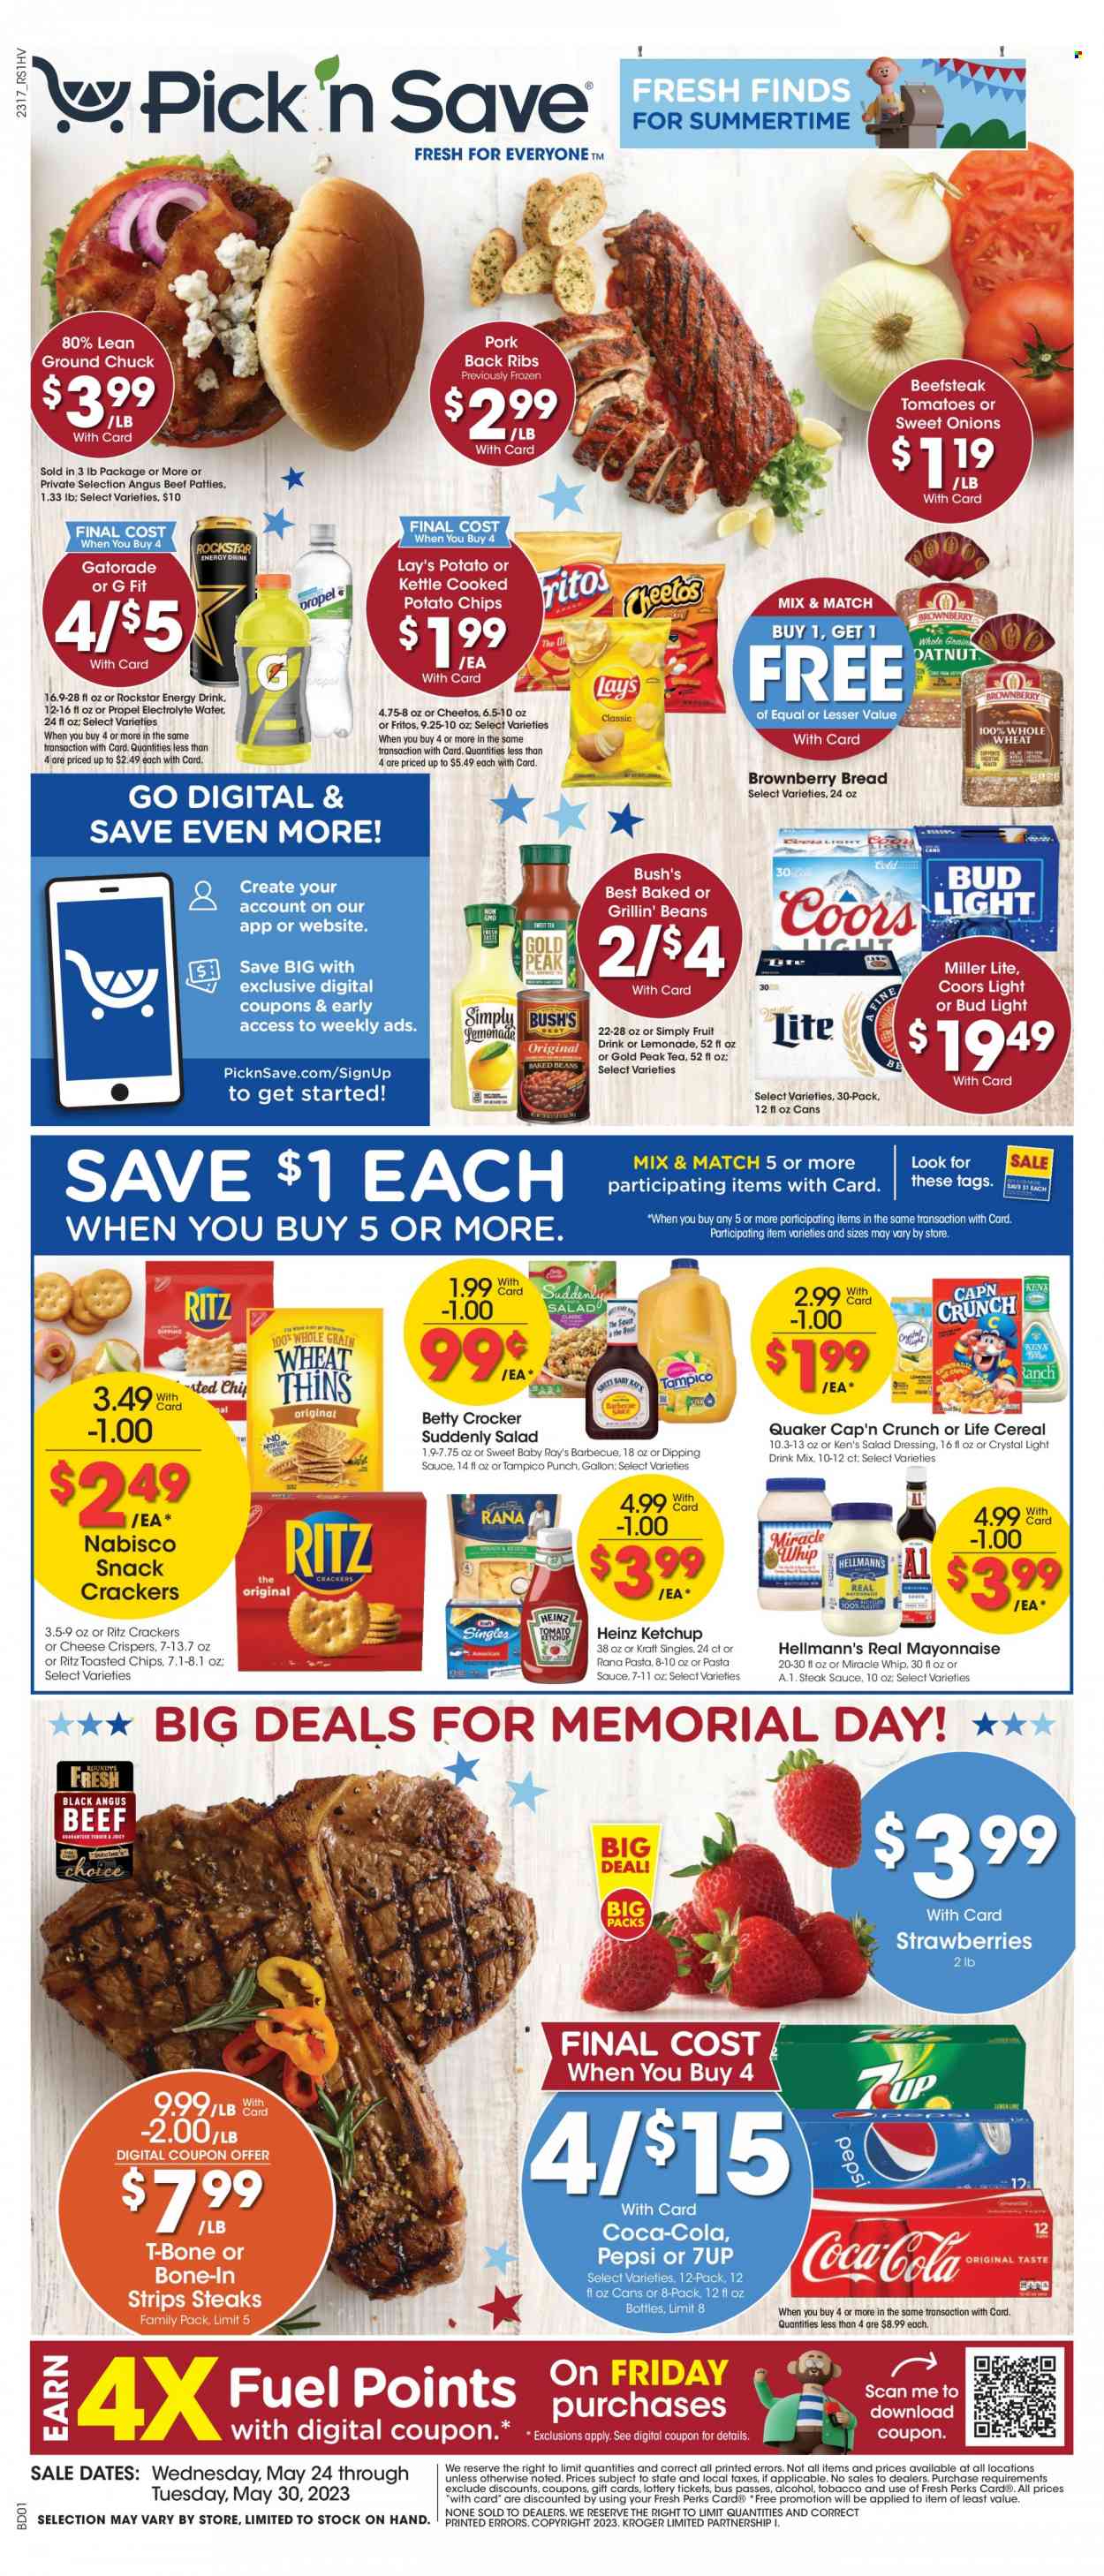 thumbnail - Pick ‘n Save Flyer - 05/24/2023 - 05/30/2023 - Sales products - bread, beans, tomatoes, strawberries, pasta sauce, Quaker, Kraft®, Rana, ready meal, sandwich slices, Kraft Singles, mayonnaise, Miracle Whip, Hellmann’s, strips, snack, crackers, RITZ, Nabisco, Fritos, potato chips, Cheetos, Lay’s, Heinz, baked beans, cereals, Cap'n Crunch, salad dressing, steak sauce, ketchup, dressing, Coca-Cola, lemonade, Pepsi, energy drink, fruit drink, soft drink, 7UP, Gold Peak Tea, Rockstar, Gatorade, fruit punch, water, tea, beer, Bud Light, beef meat, ground chuck, t-bone steak, steak, ribs, pork meat, pork ribs, pork back ribs, electrolyte drink, Miller Lite, Coors. Page 1.